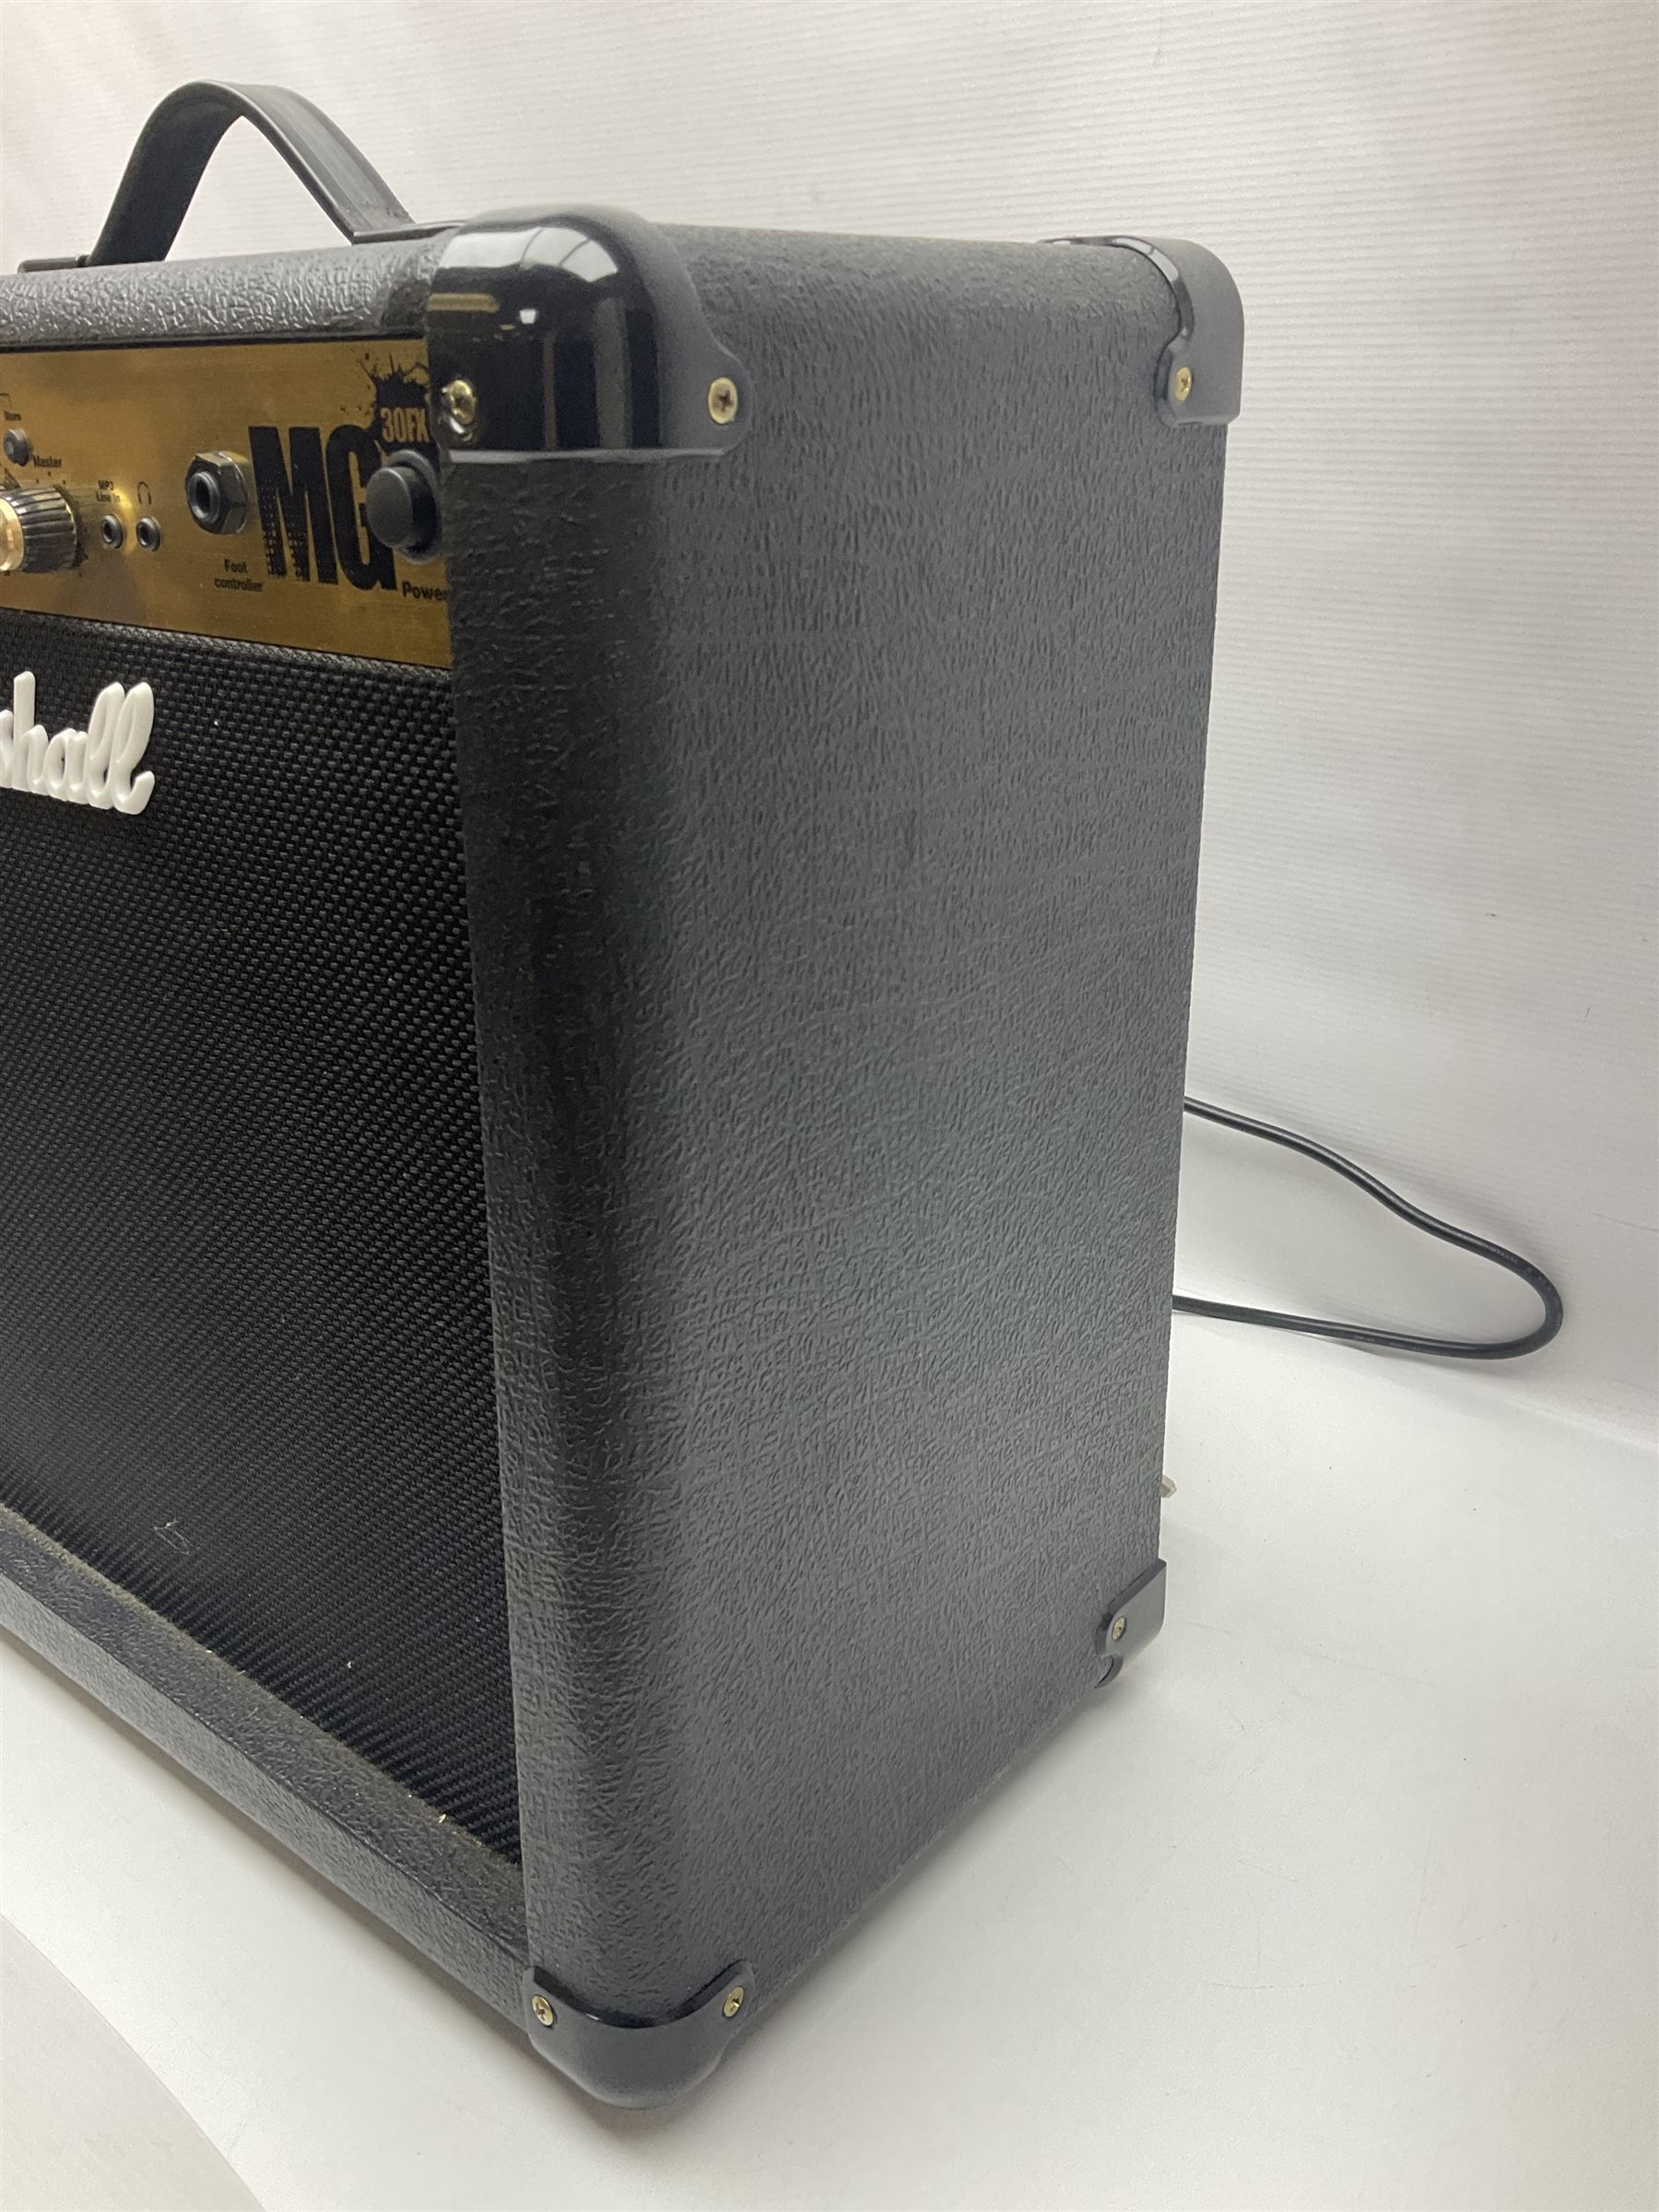 Marshall MG Series 30DFX amplifier L47.5cm; with Marshall MG fully programmable foot controller; bot - Image 6 of 13